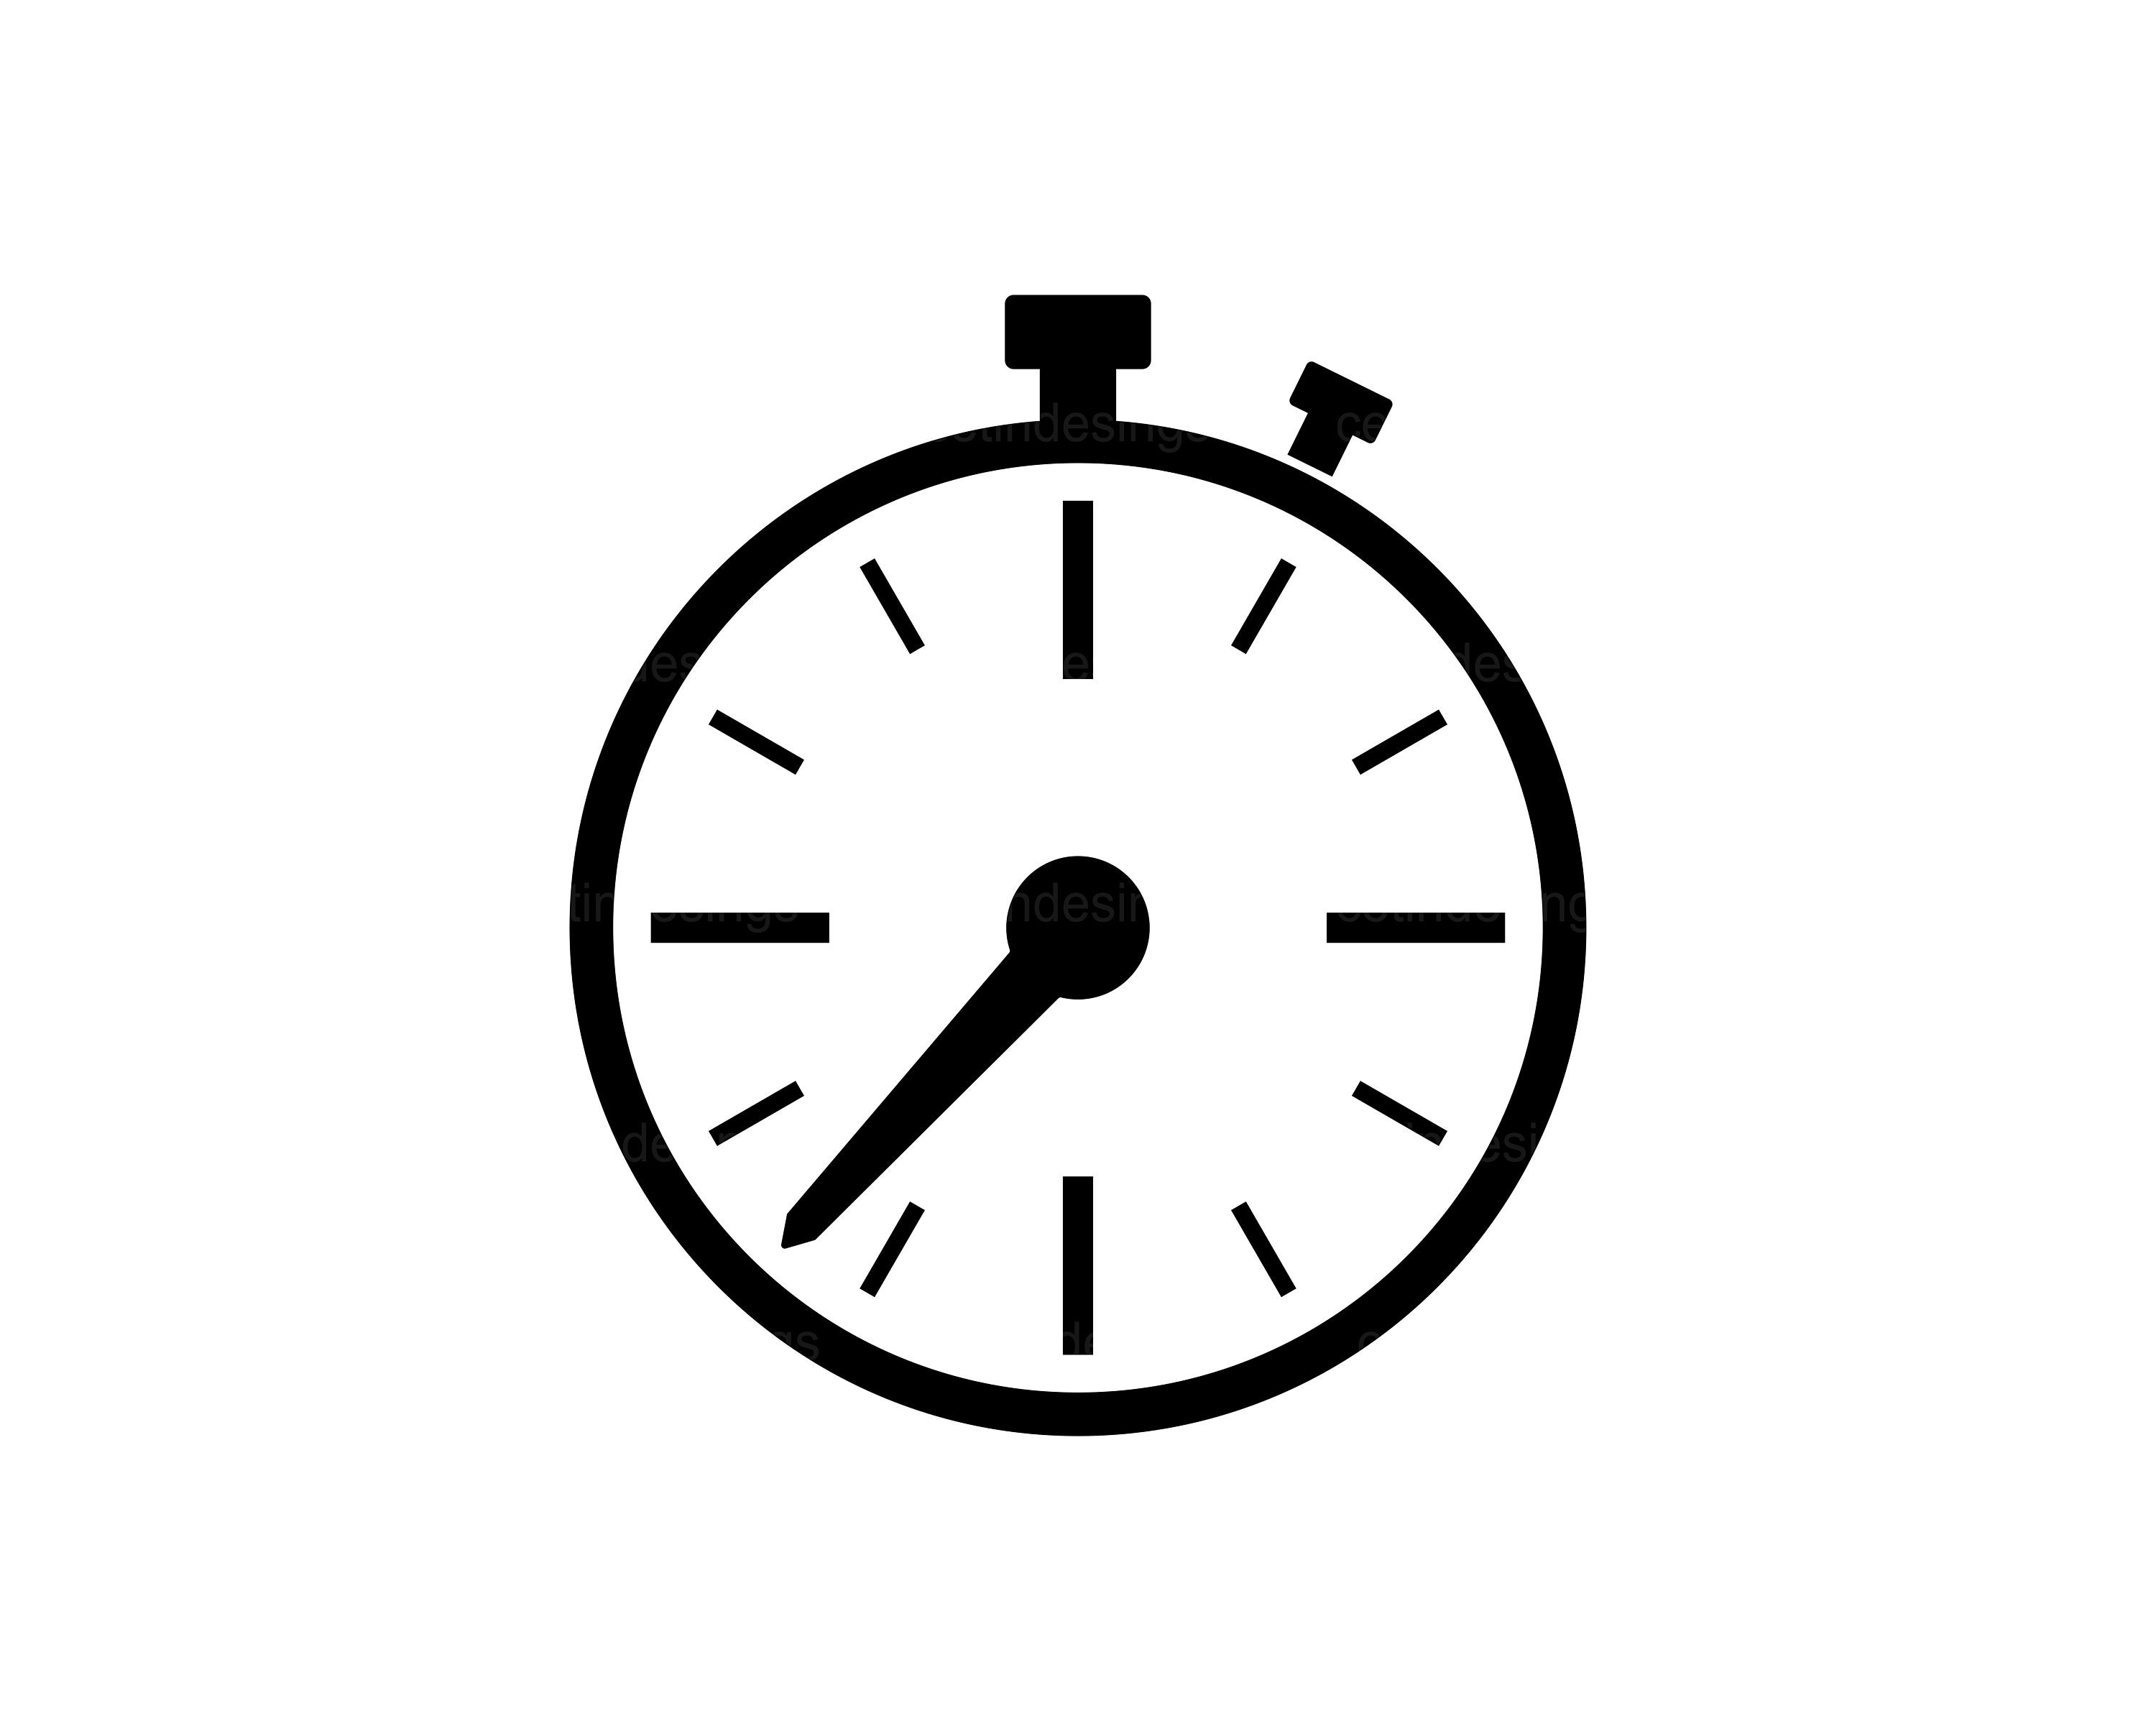 Clock timer stopwatch clipart. Free download transparent .PNG